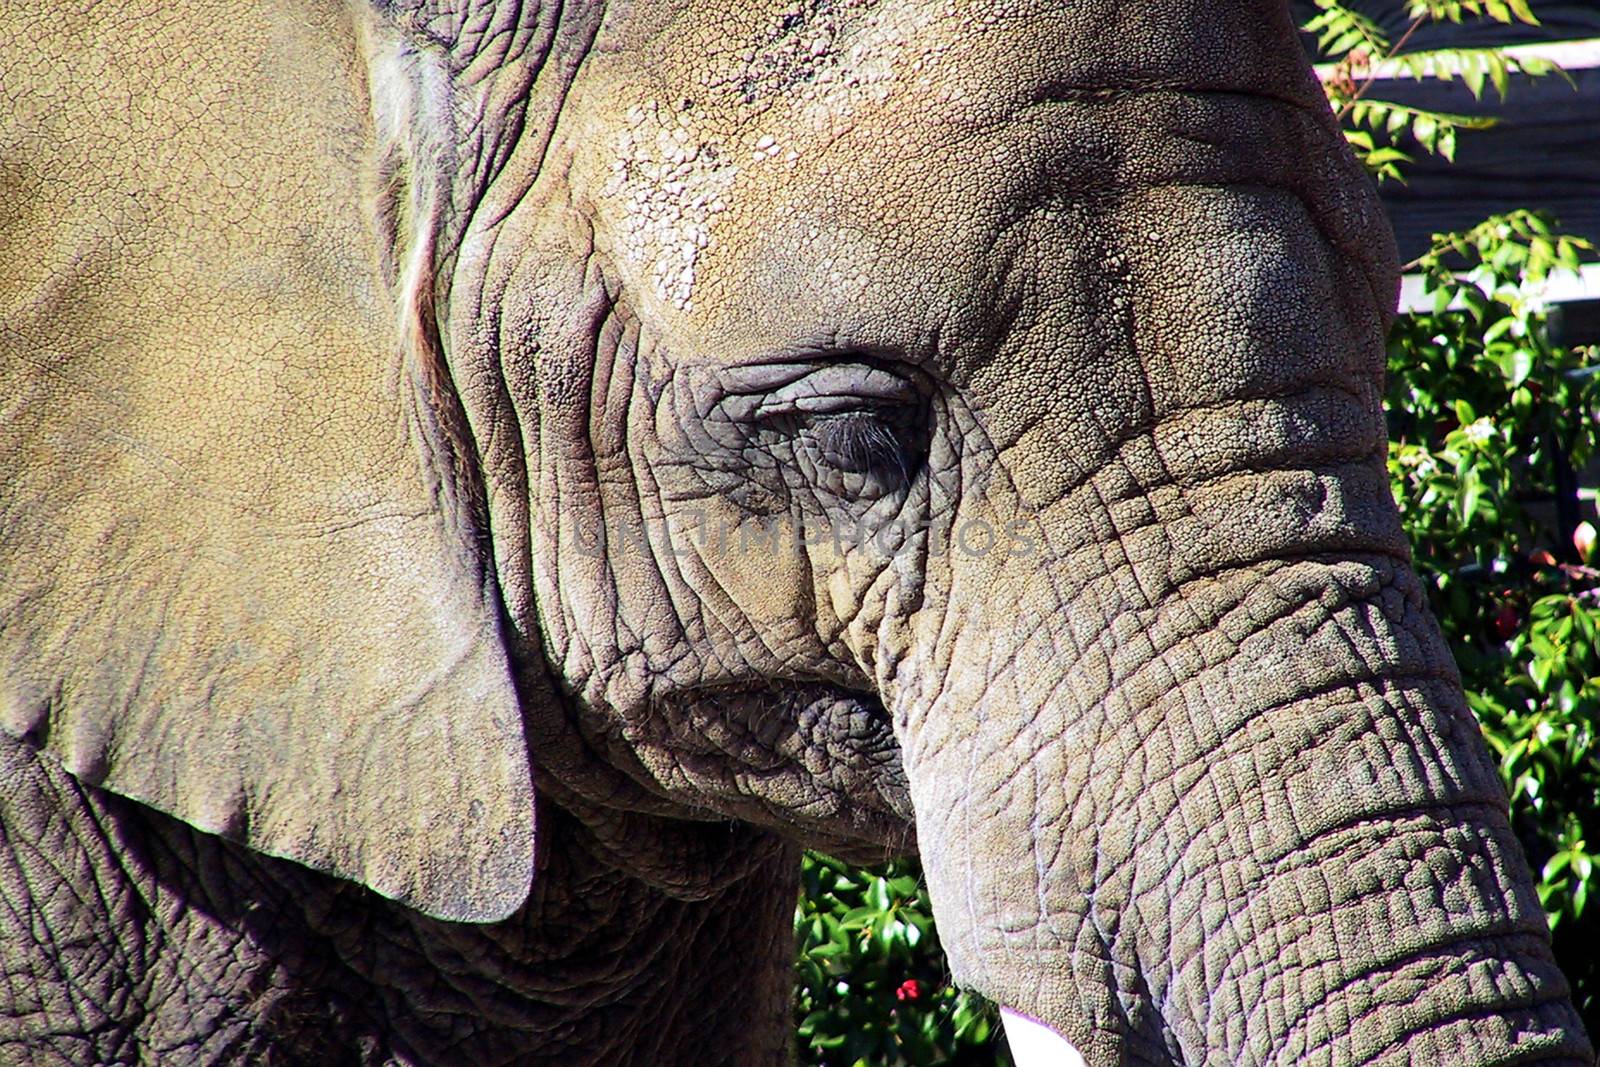 Closeup portrait of elephant with green leaves in background.